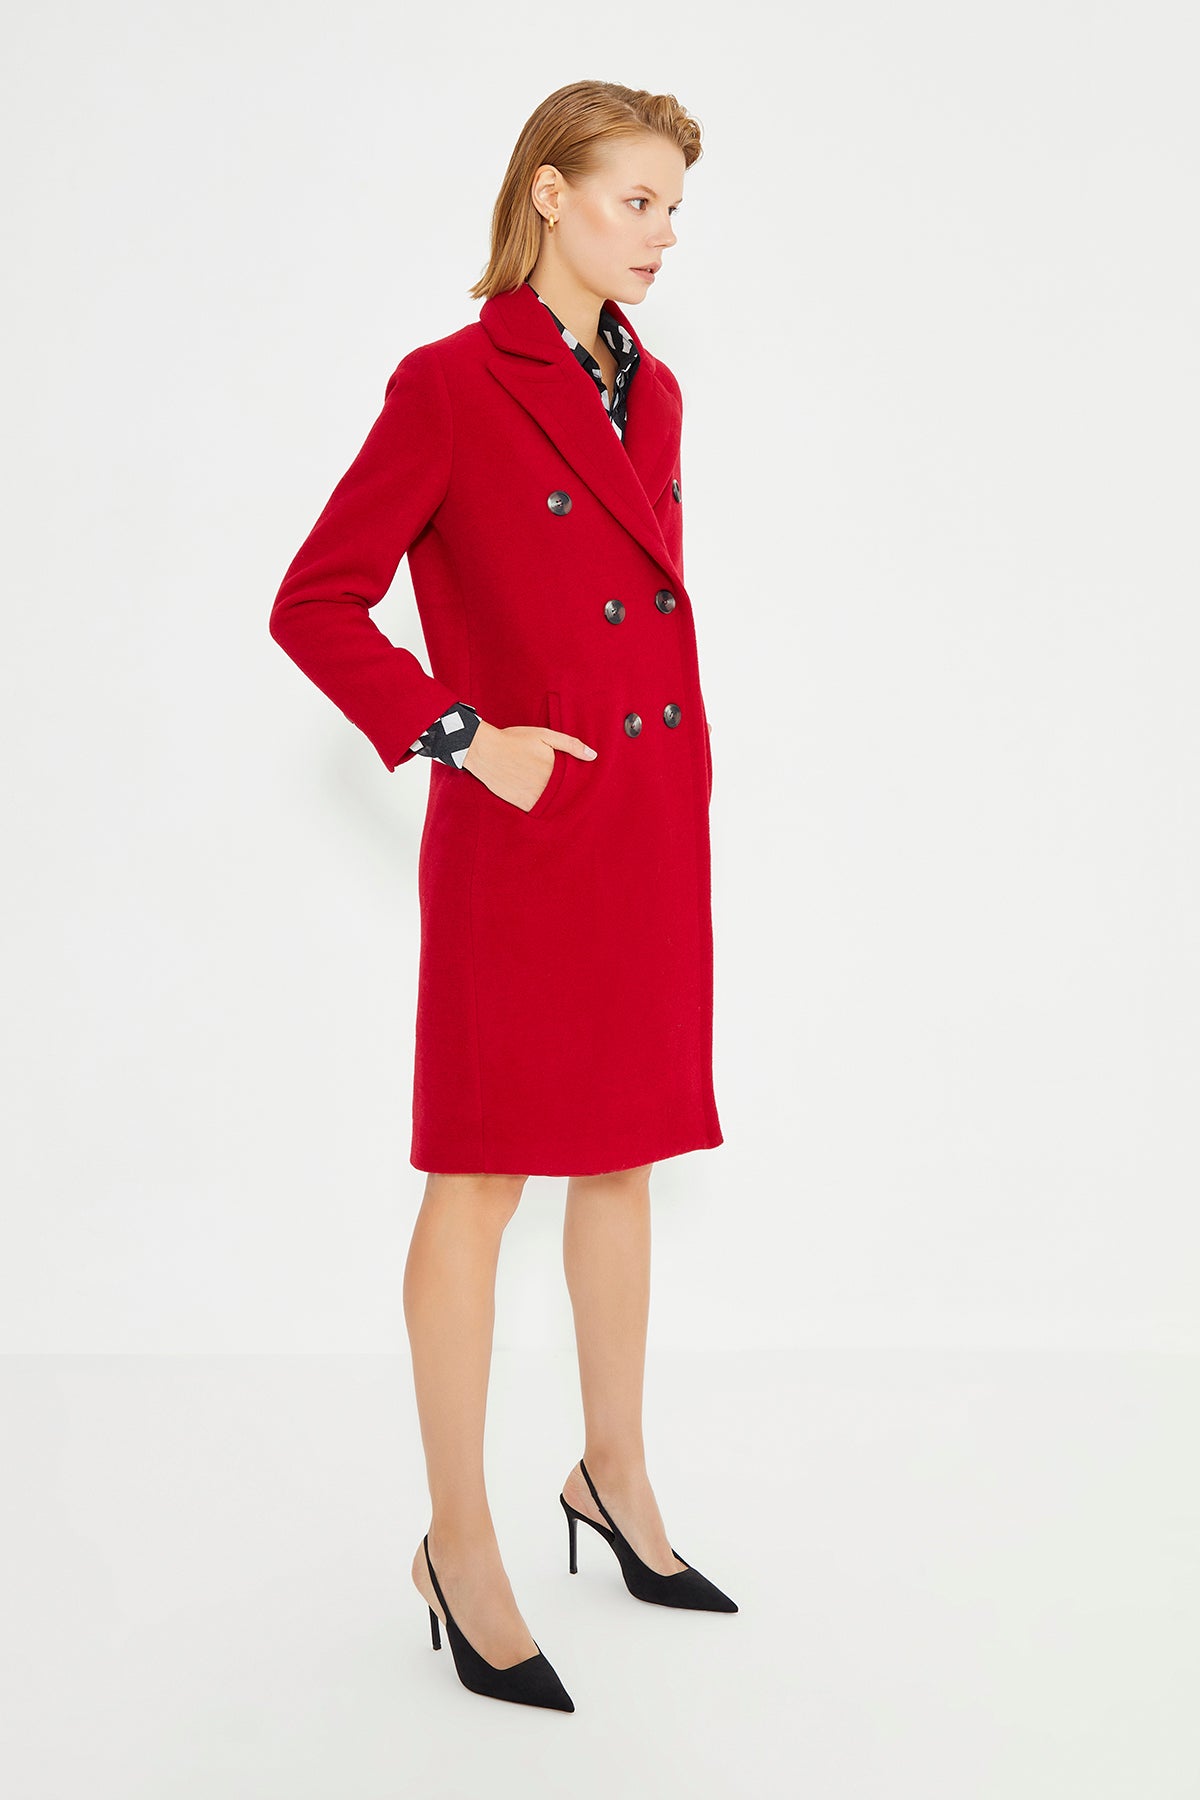 Red Double Breasted Front Button Closure Long Women's Coat